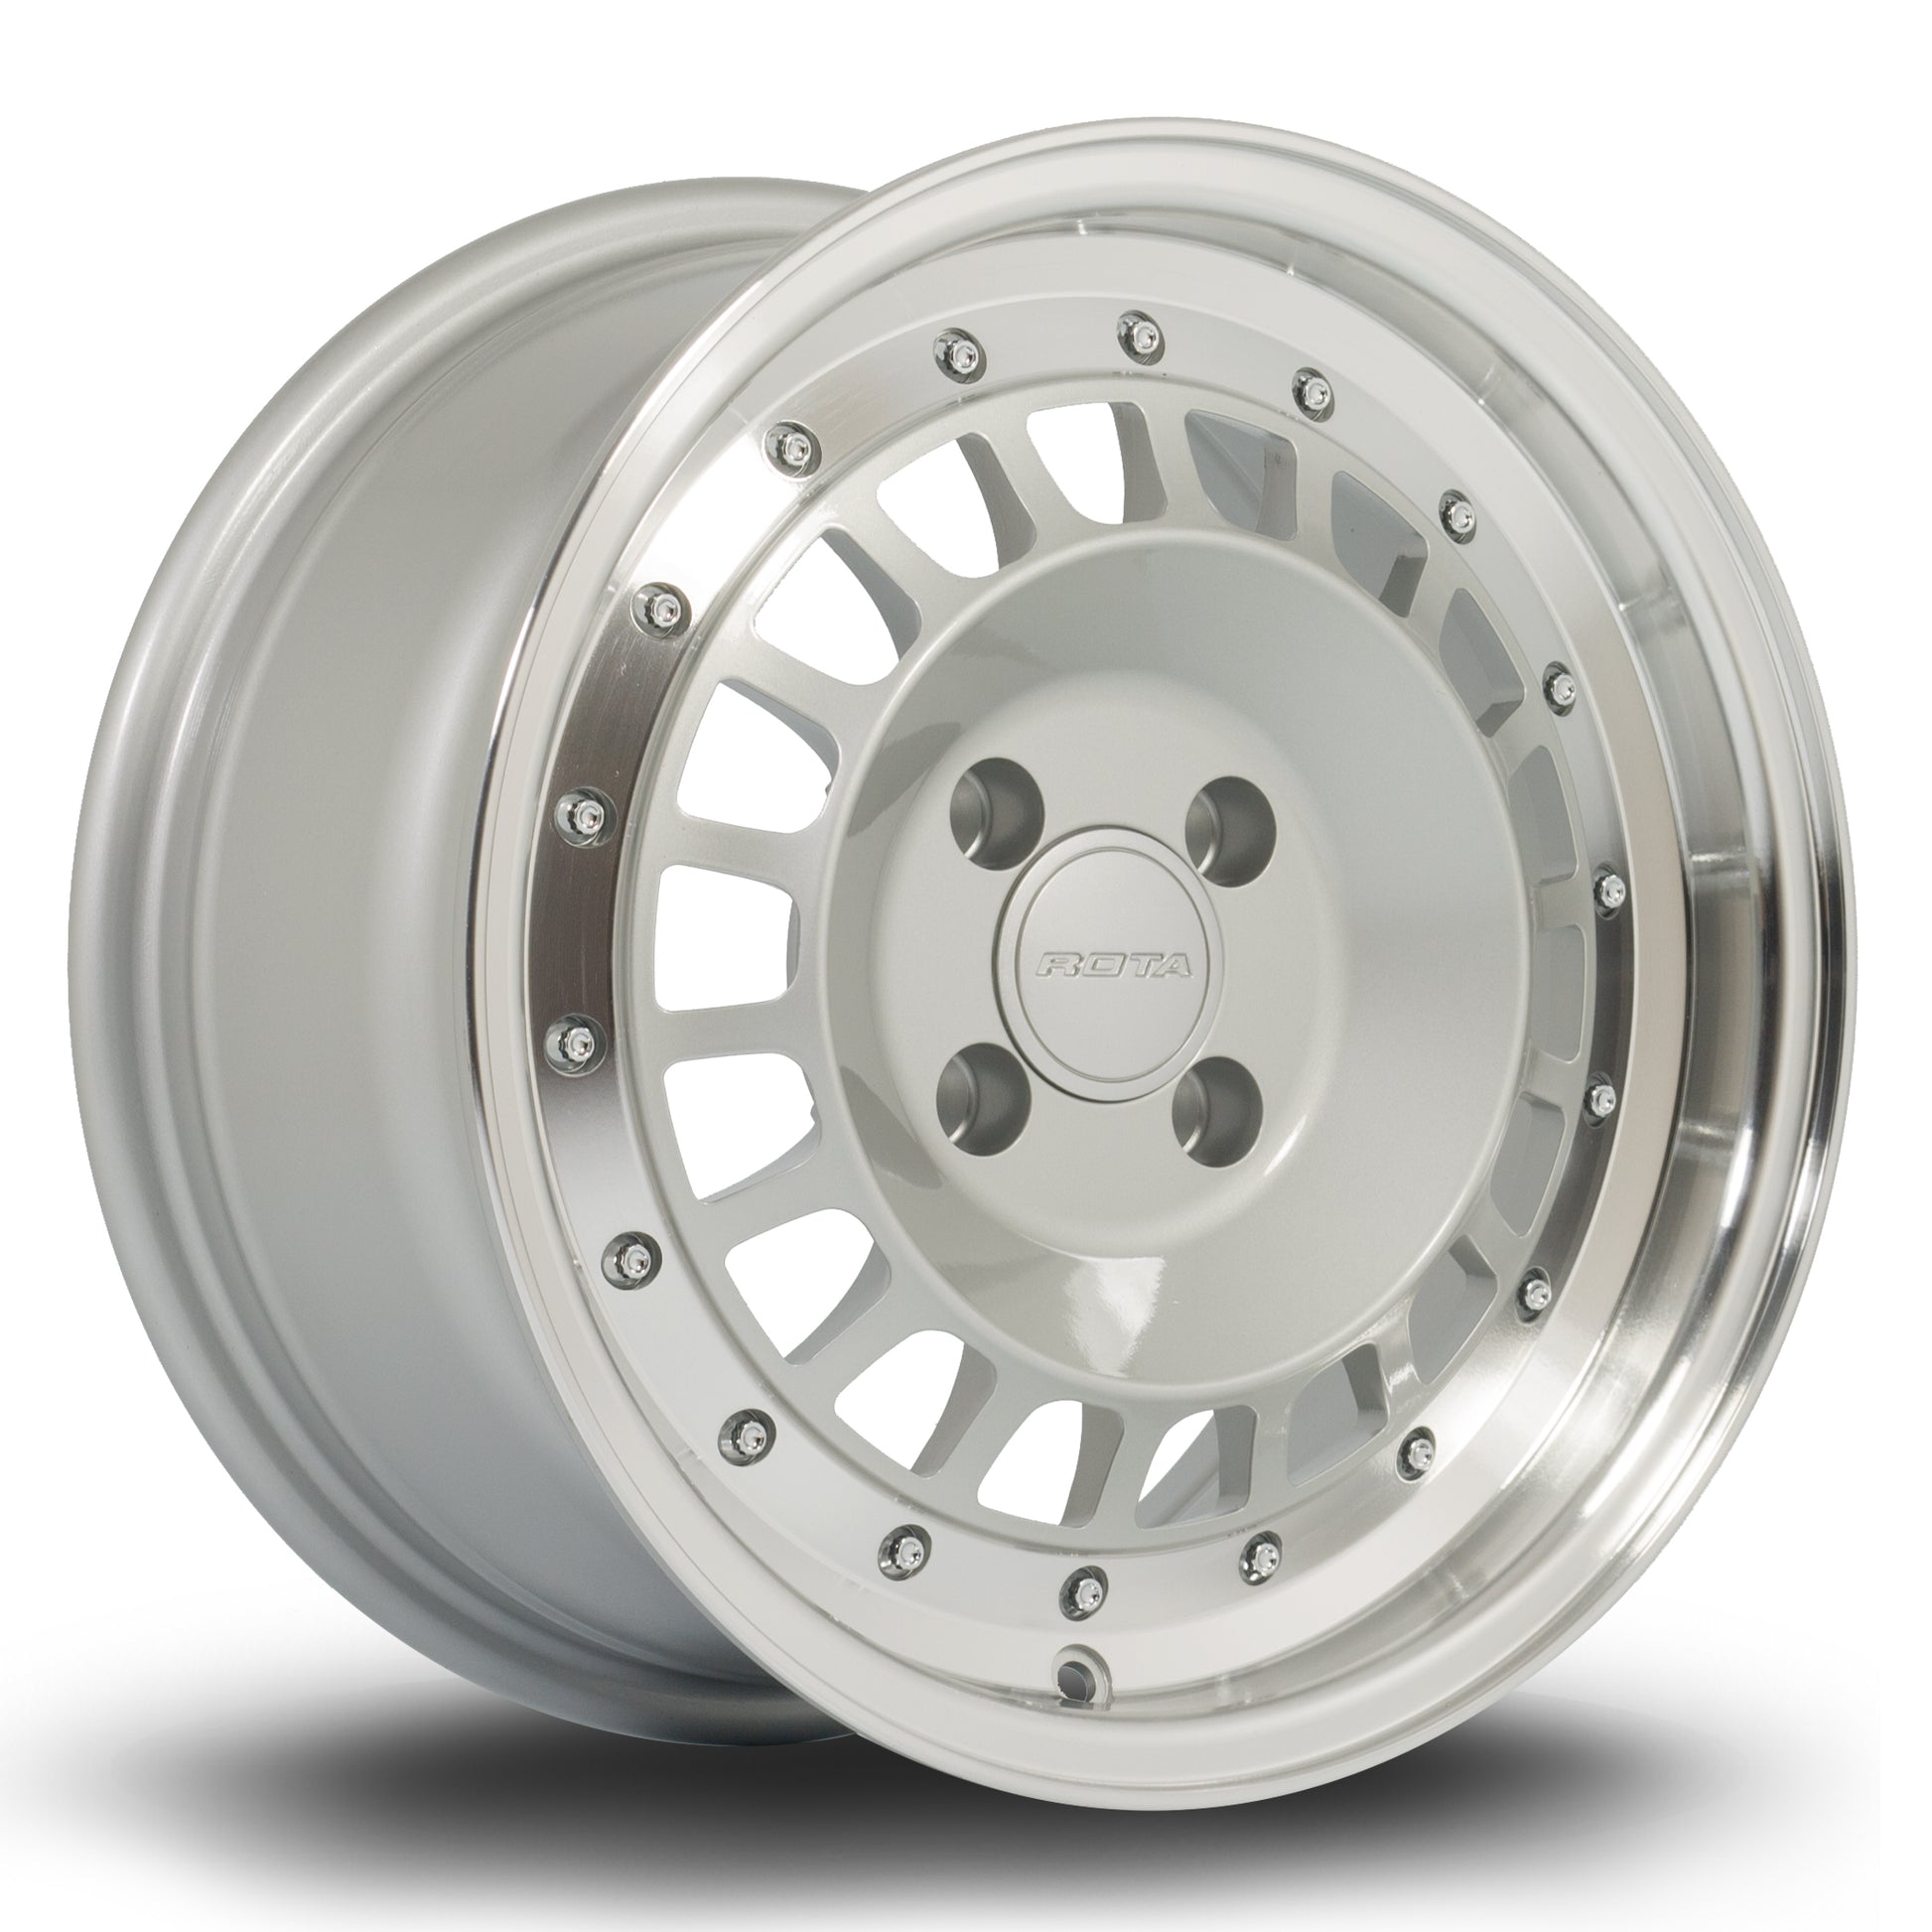 Rota Speciale, 15 x 7 inch, 4100 PCD, ET20 in Satin Silver with Polished Lip Single Rim - Rotashop